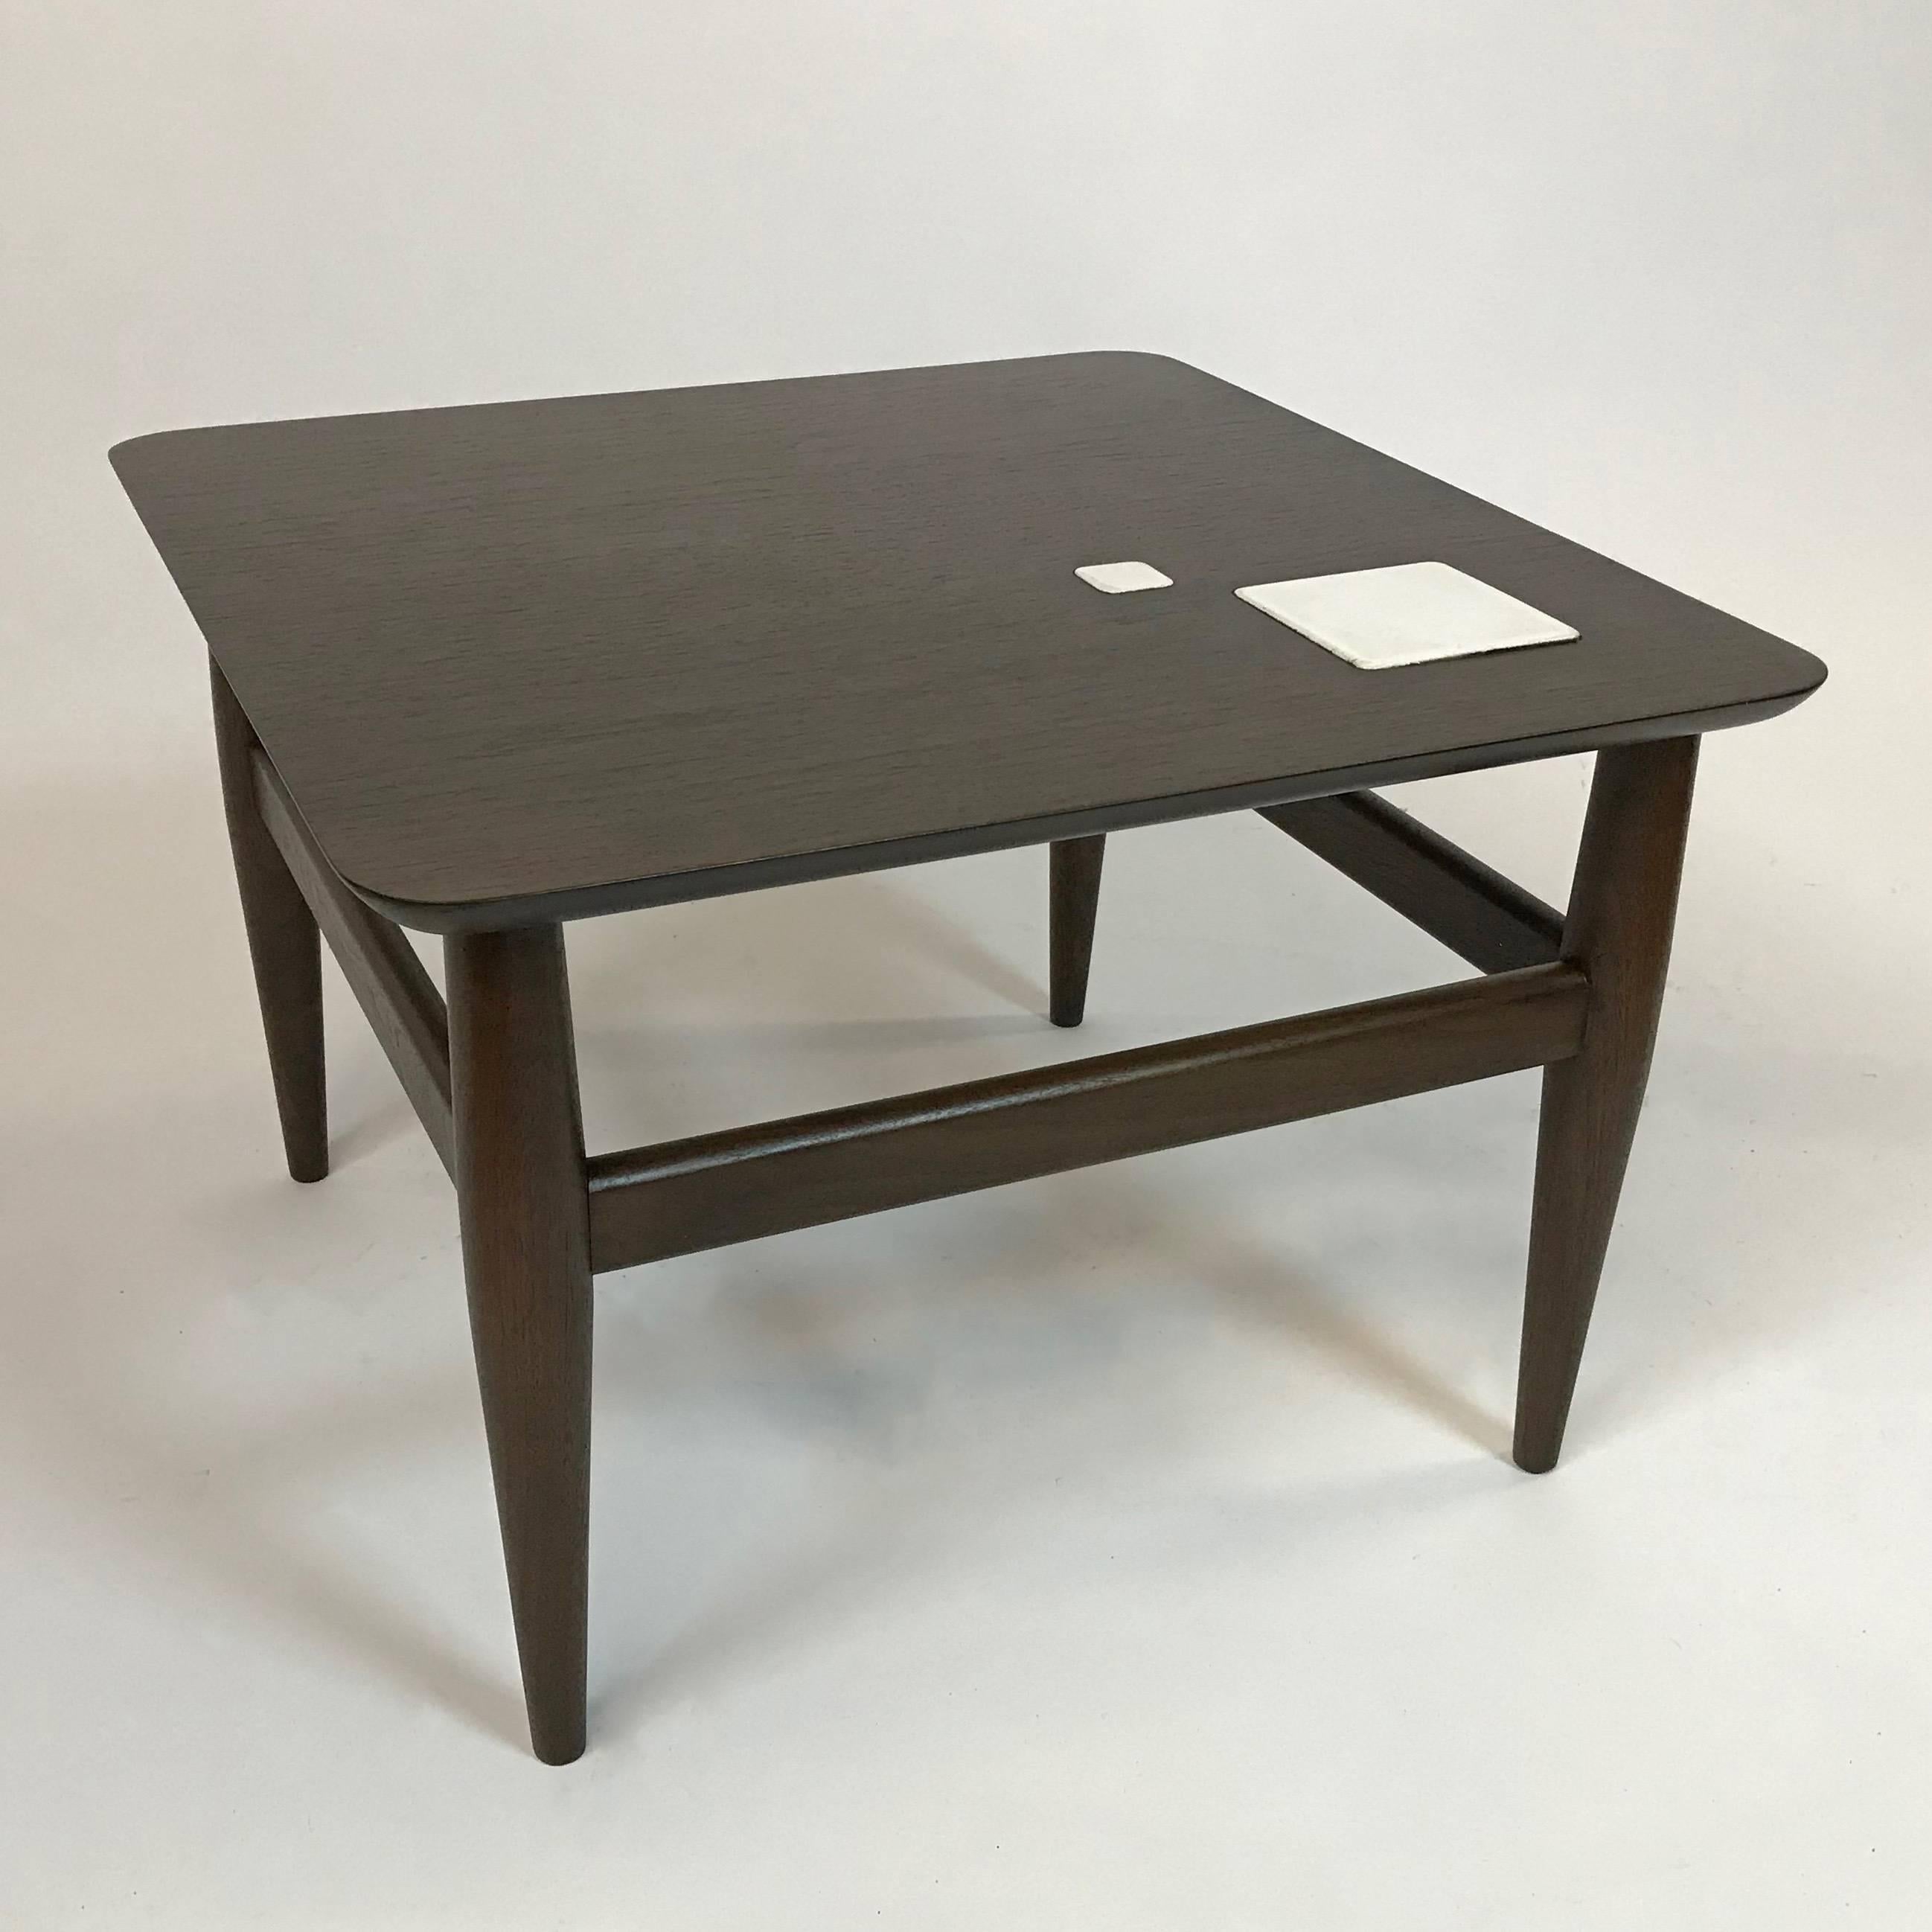 Mid-Century Modern, ebonized walnut, side coffee table features a contrasting white ceramic tile inlay.